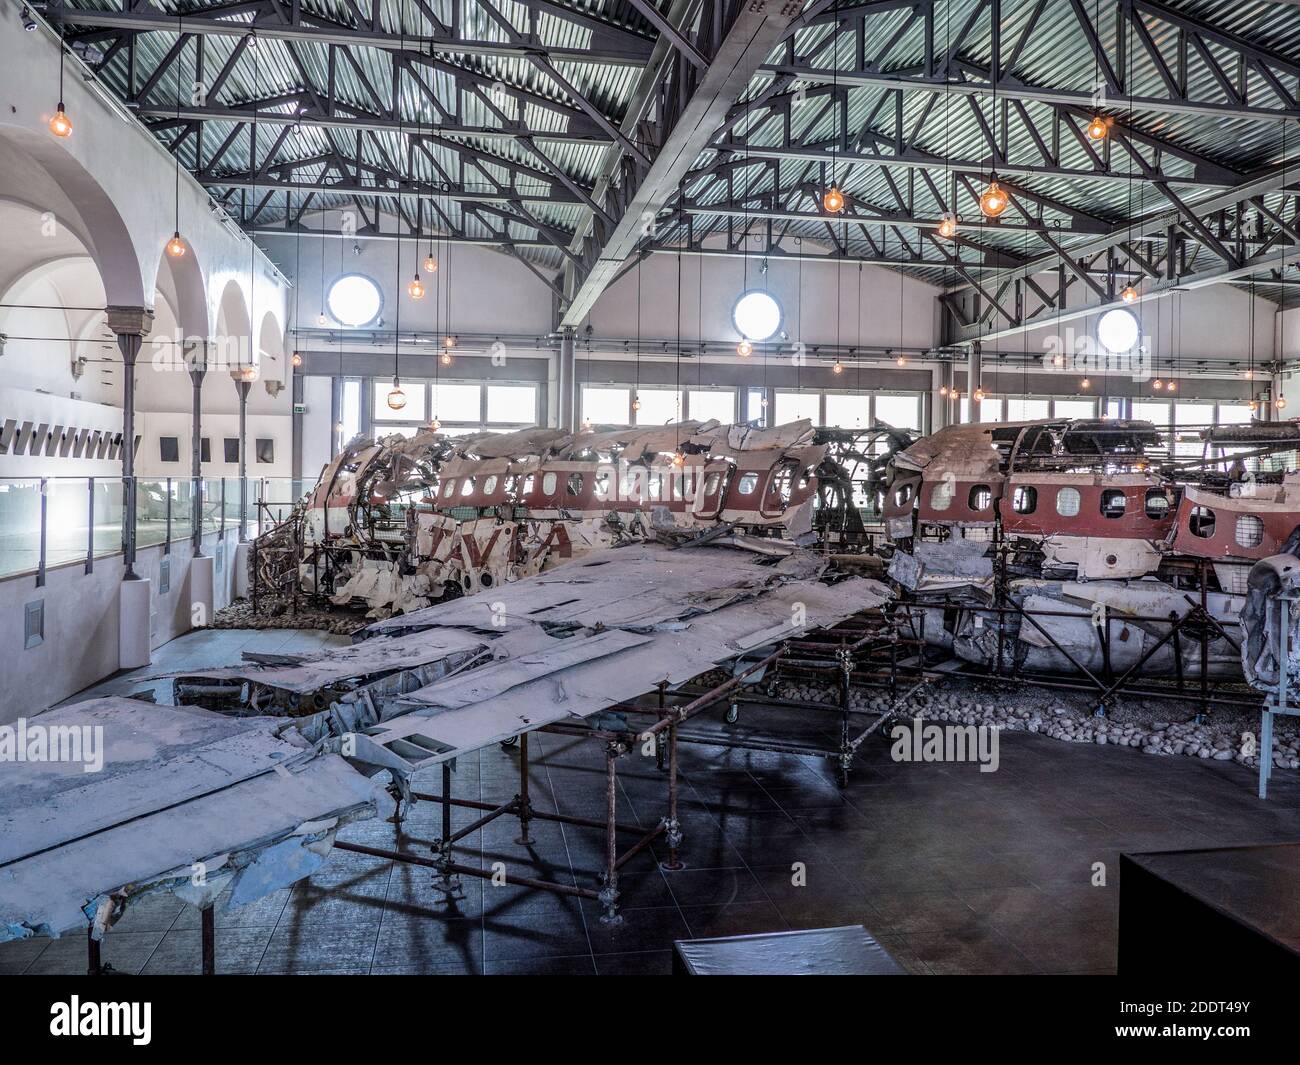 Museum of the Memory of Ustica in Bologna which houses the wreck of the DC9 plane mysteriously shot down on June 27, 1980. Italy Stock Photo